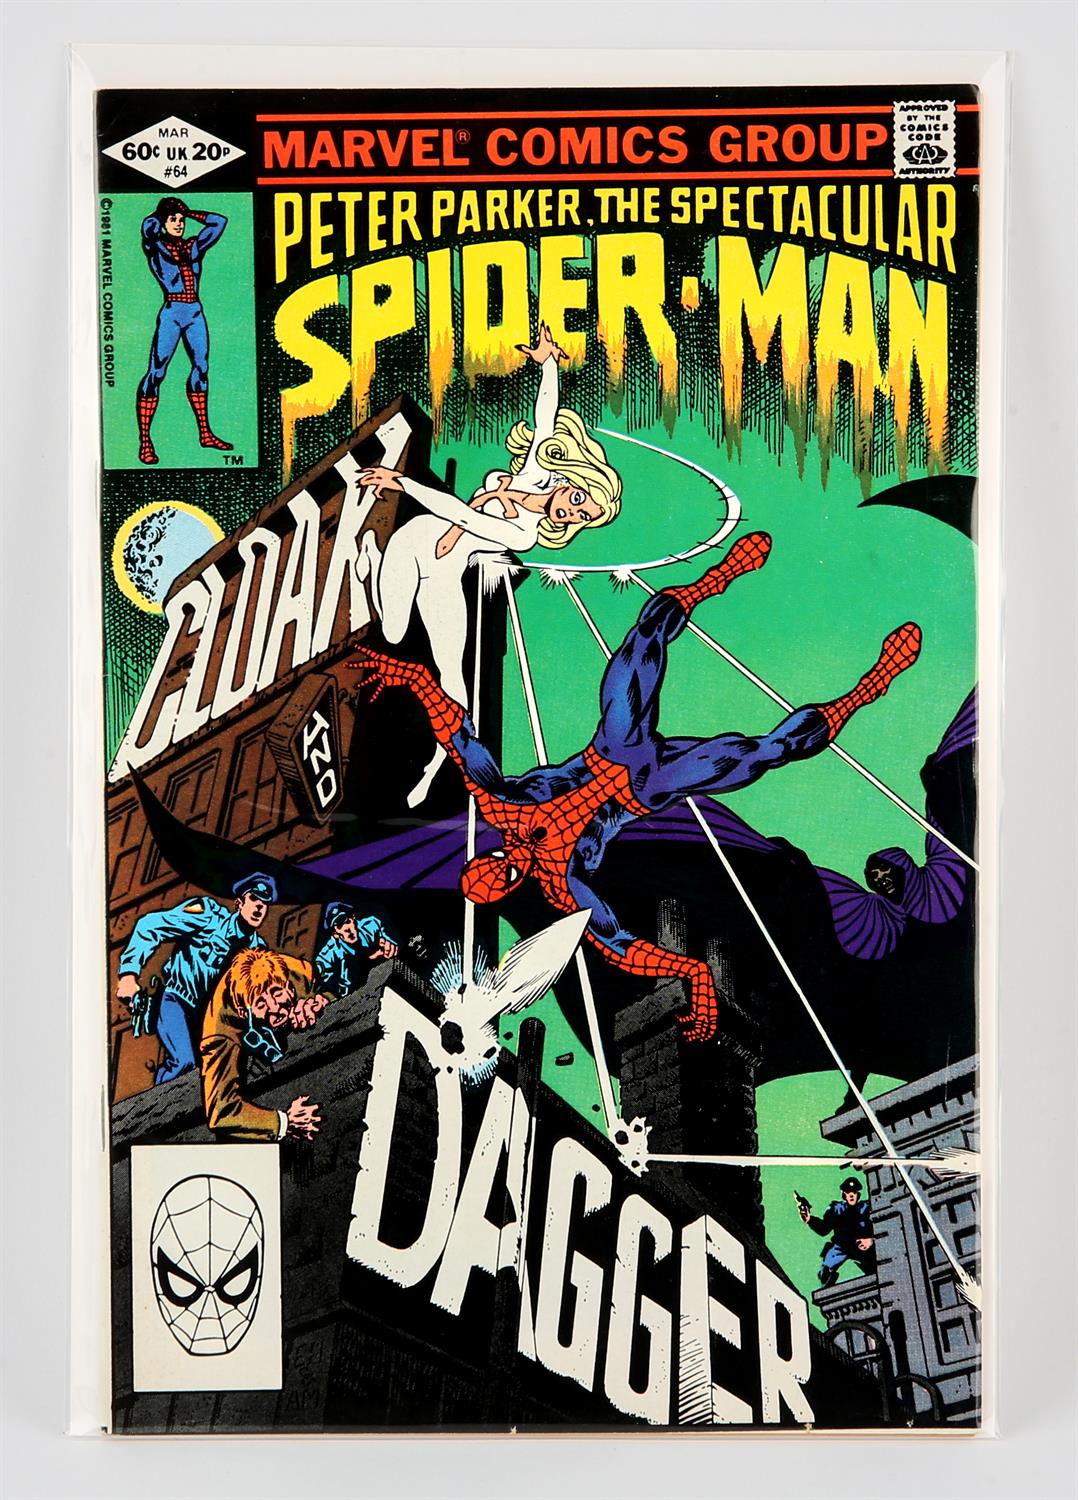 Marvel Comics: Peter Parker The Spectacular Spider-Man No. 64 featuring the 1st appearance of Cloak